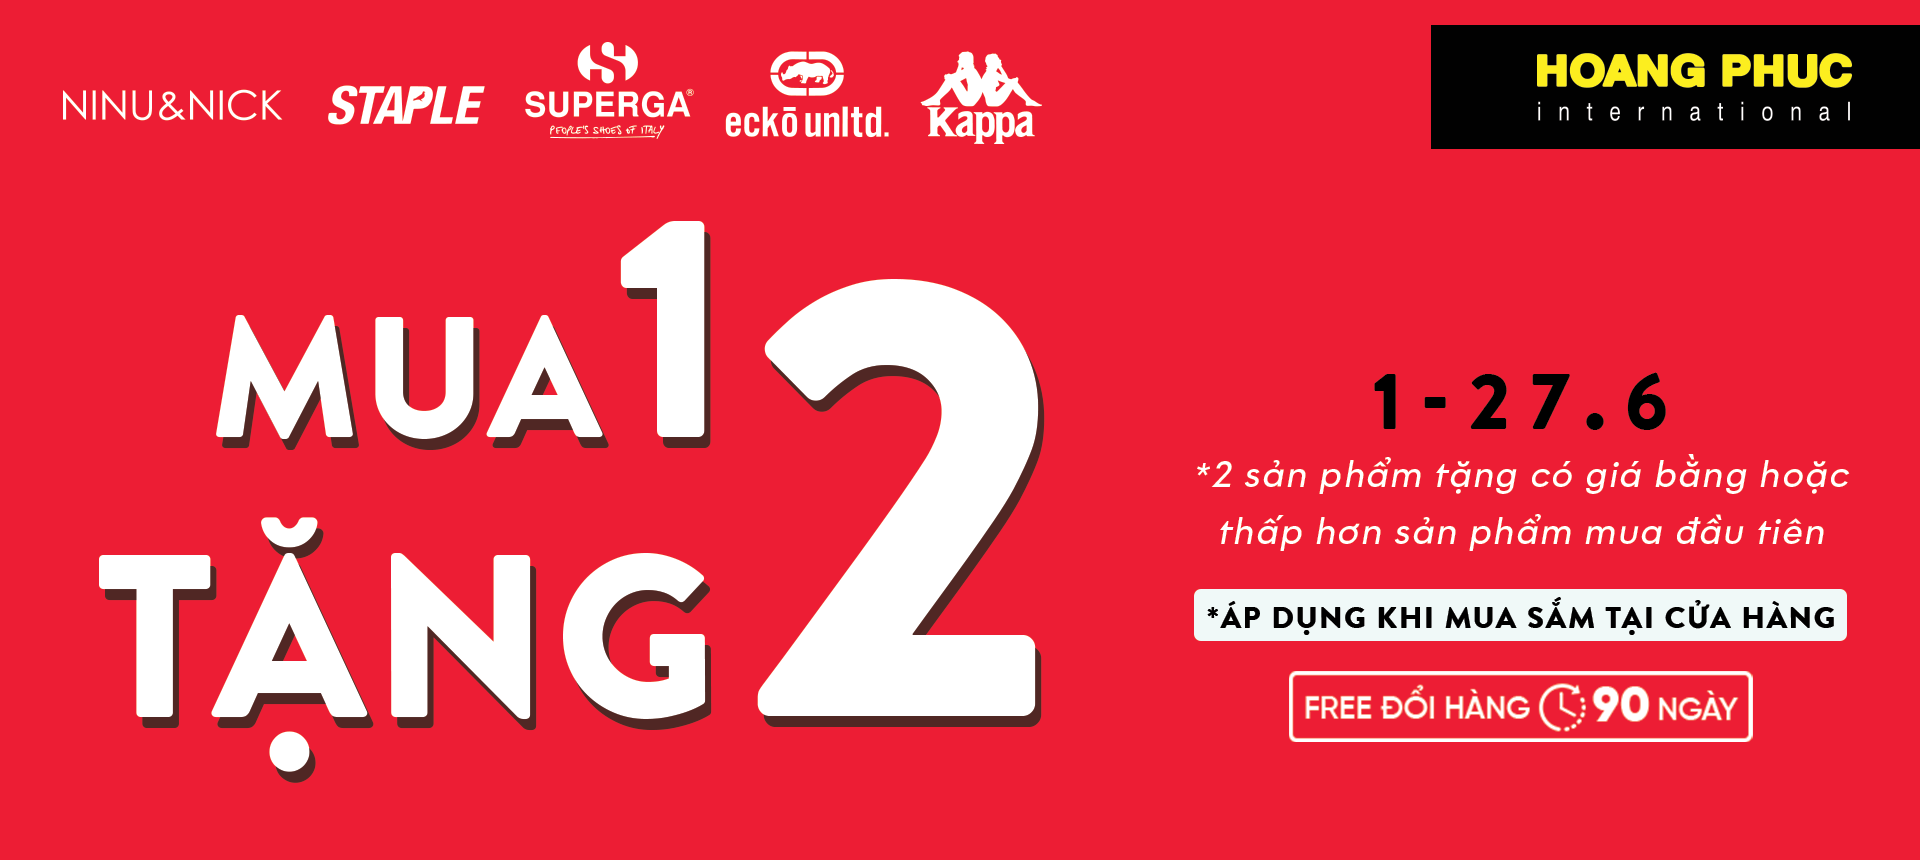 BUY 1 GET 2 - ONLY FROM HOANG PHUC INTERNATIONAL